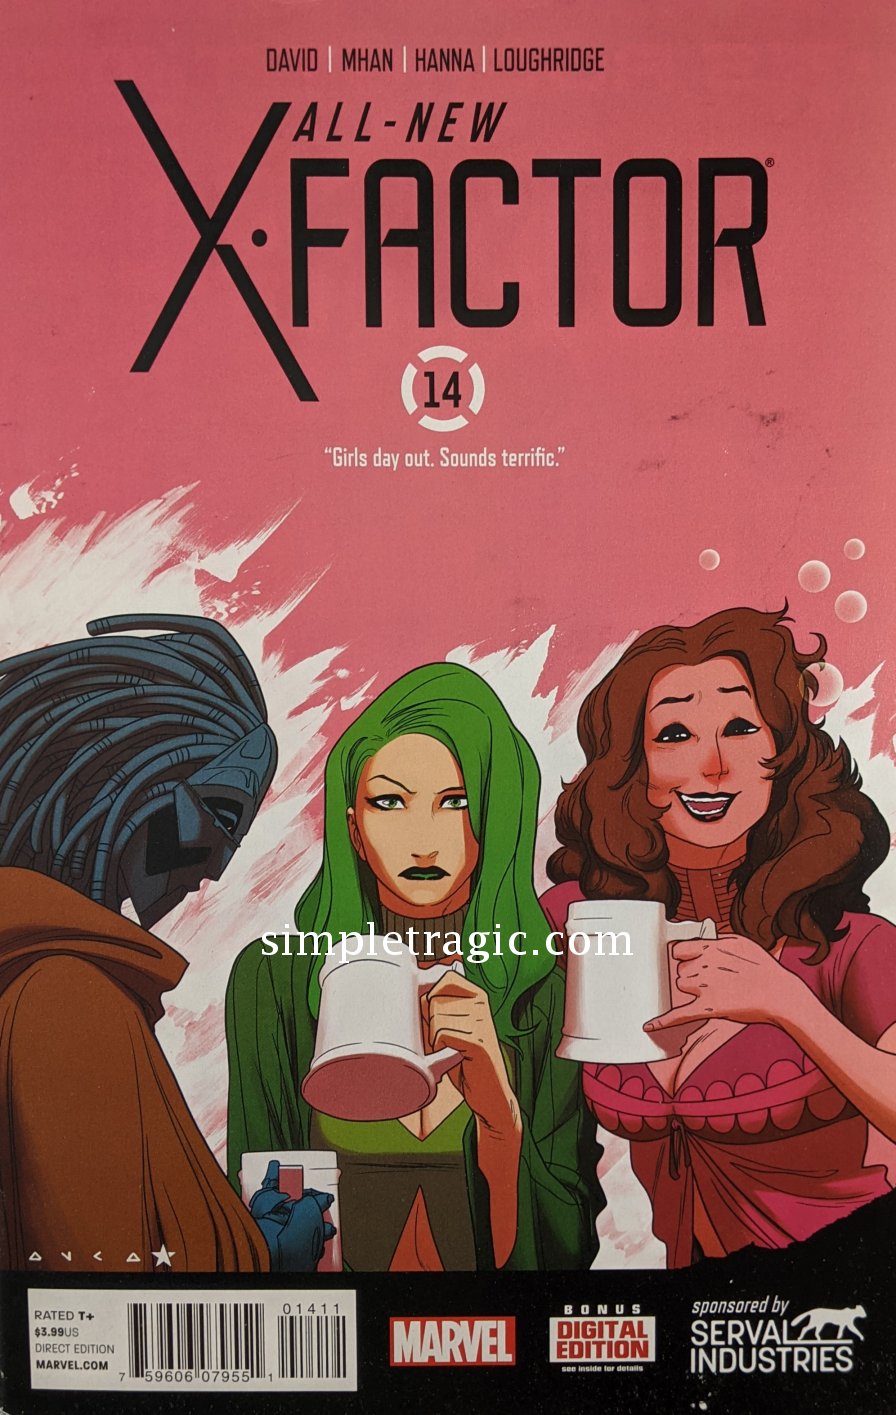 All-New X-Factor #14 Comic Book Cover Art